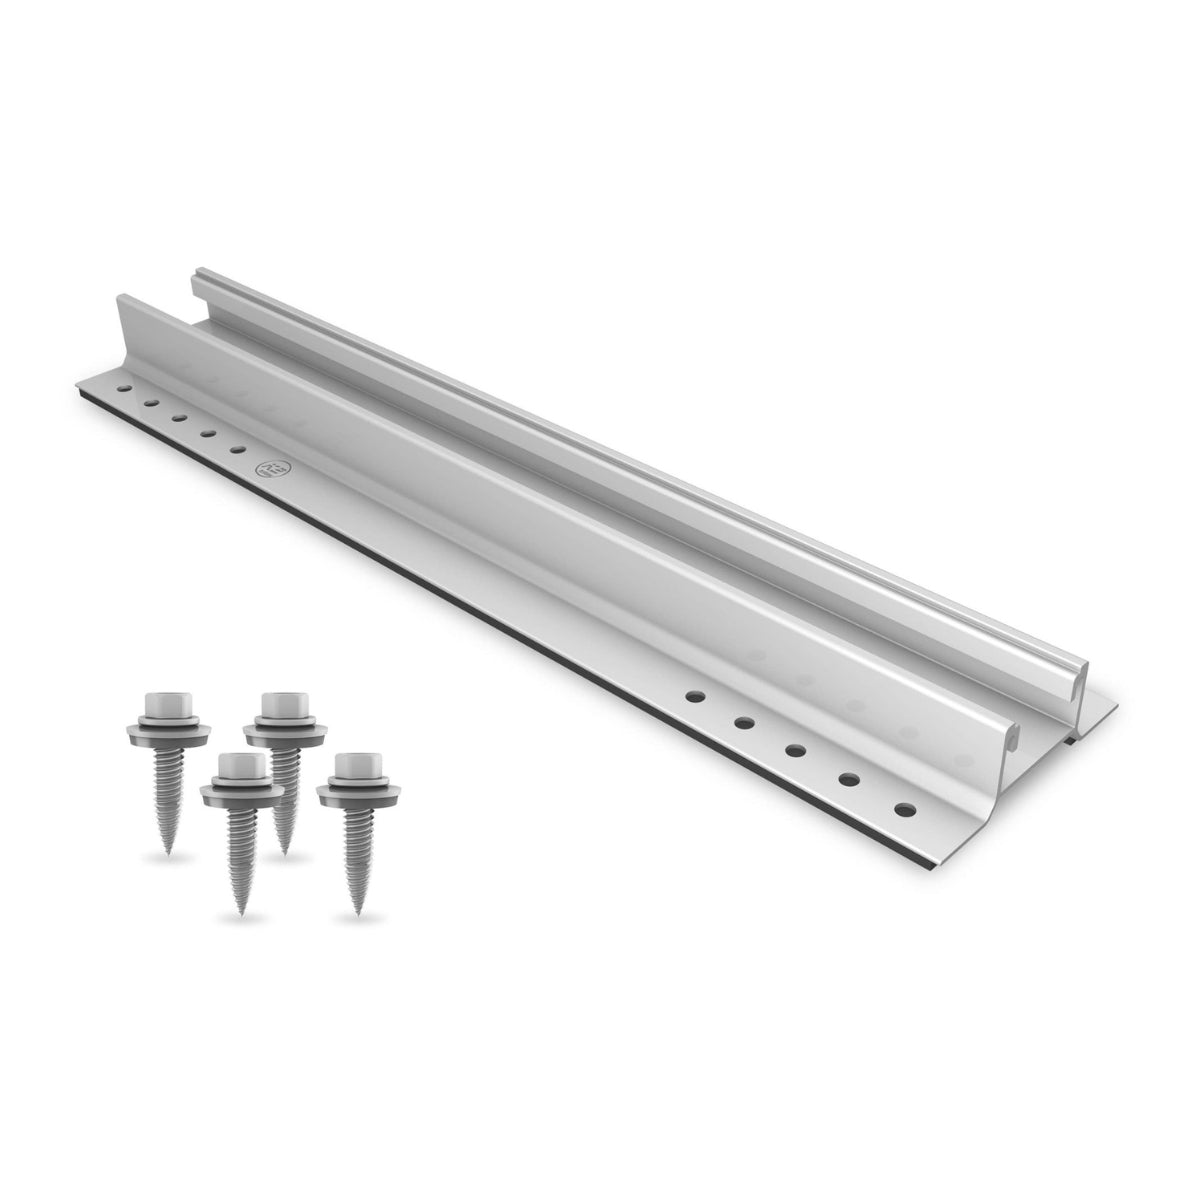 K2-Systems IBR Roof MiniRail MK2 5 Panel Roof Mounting System